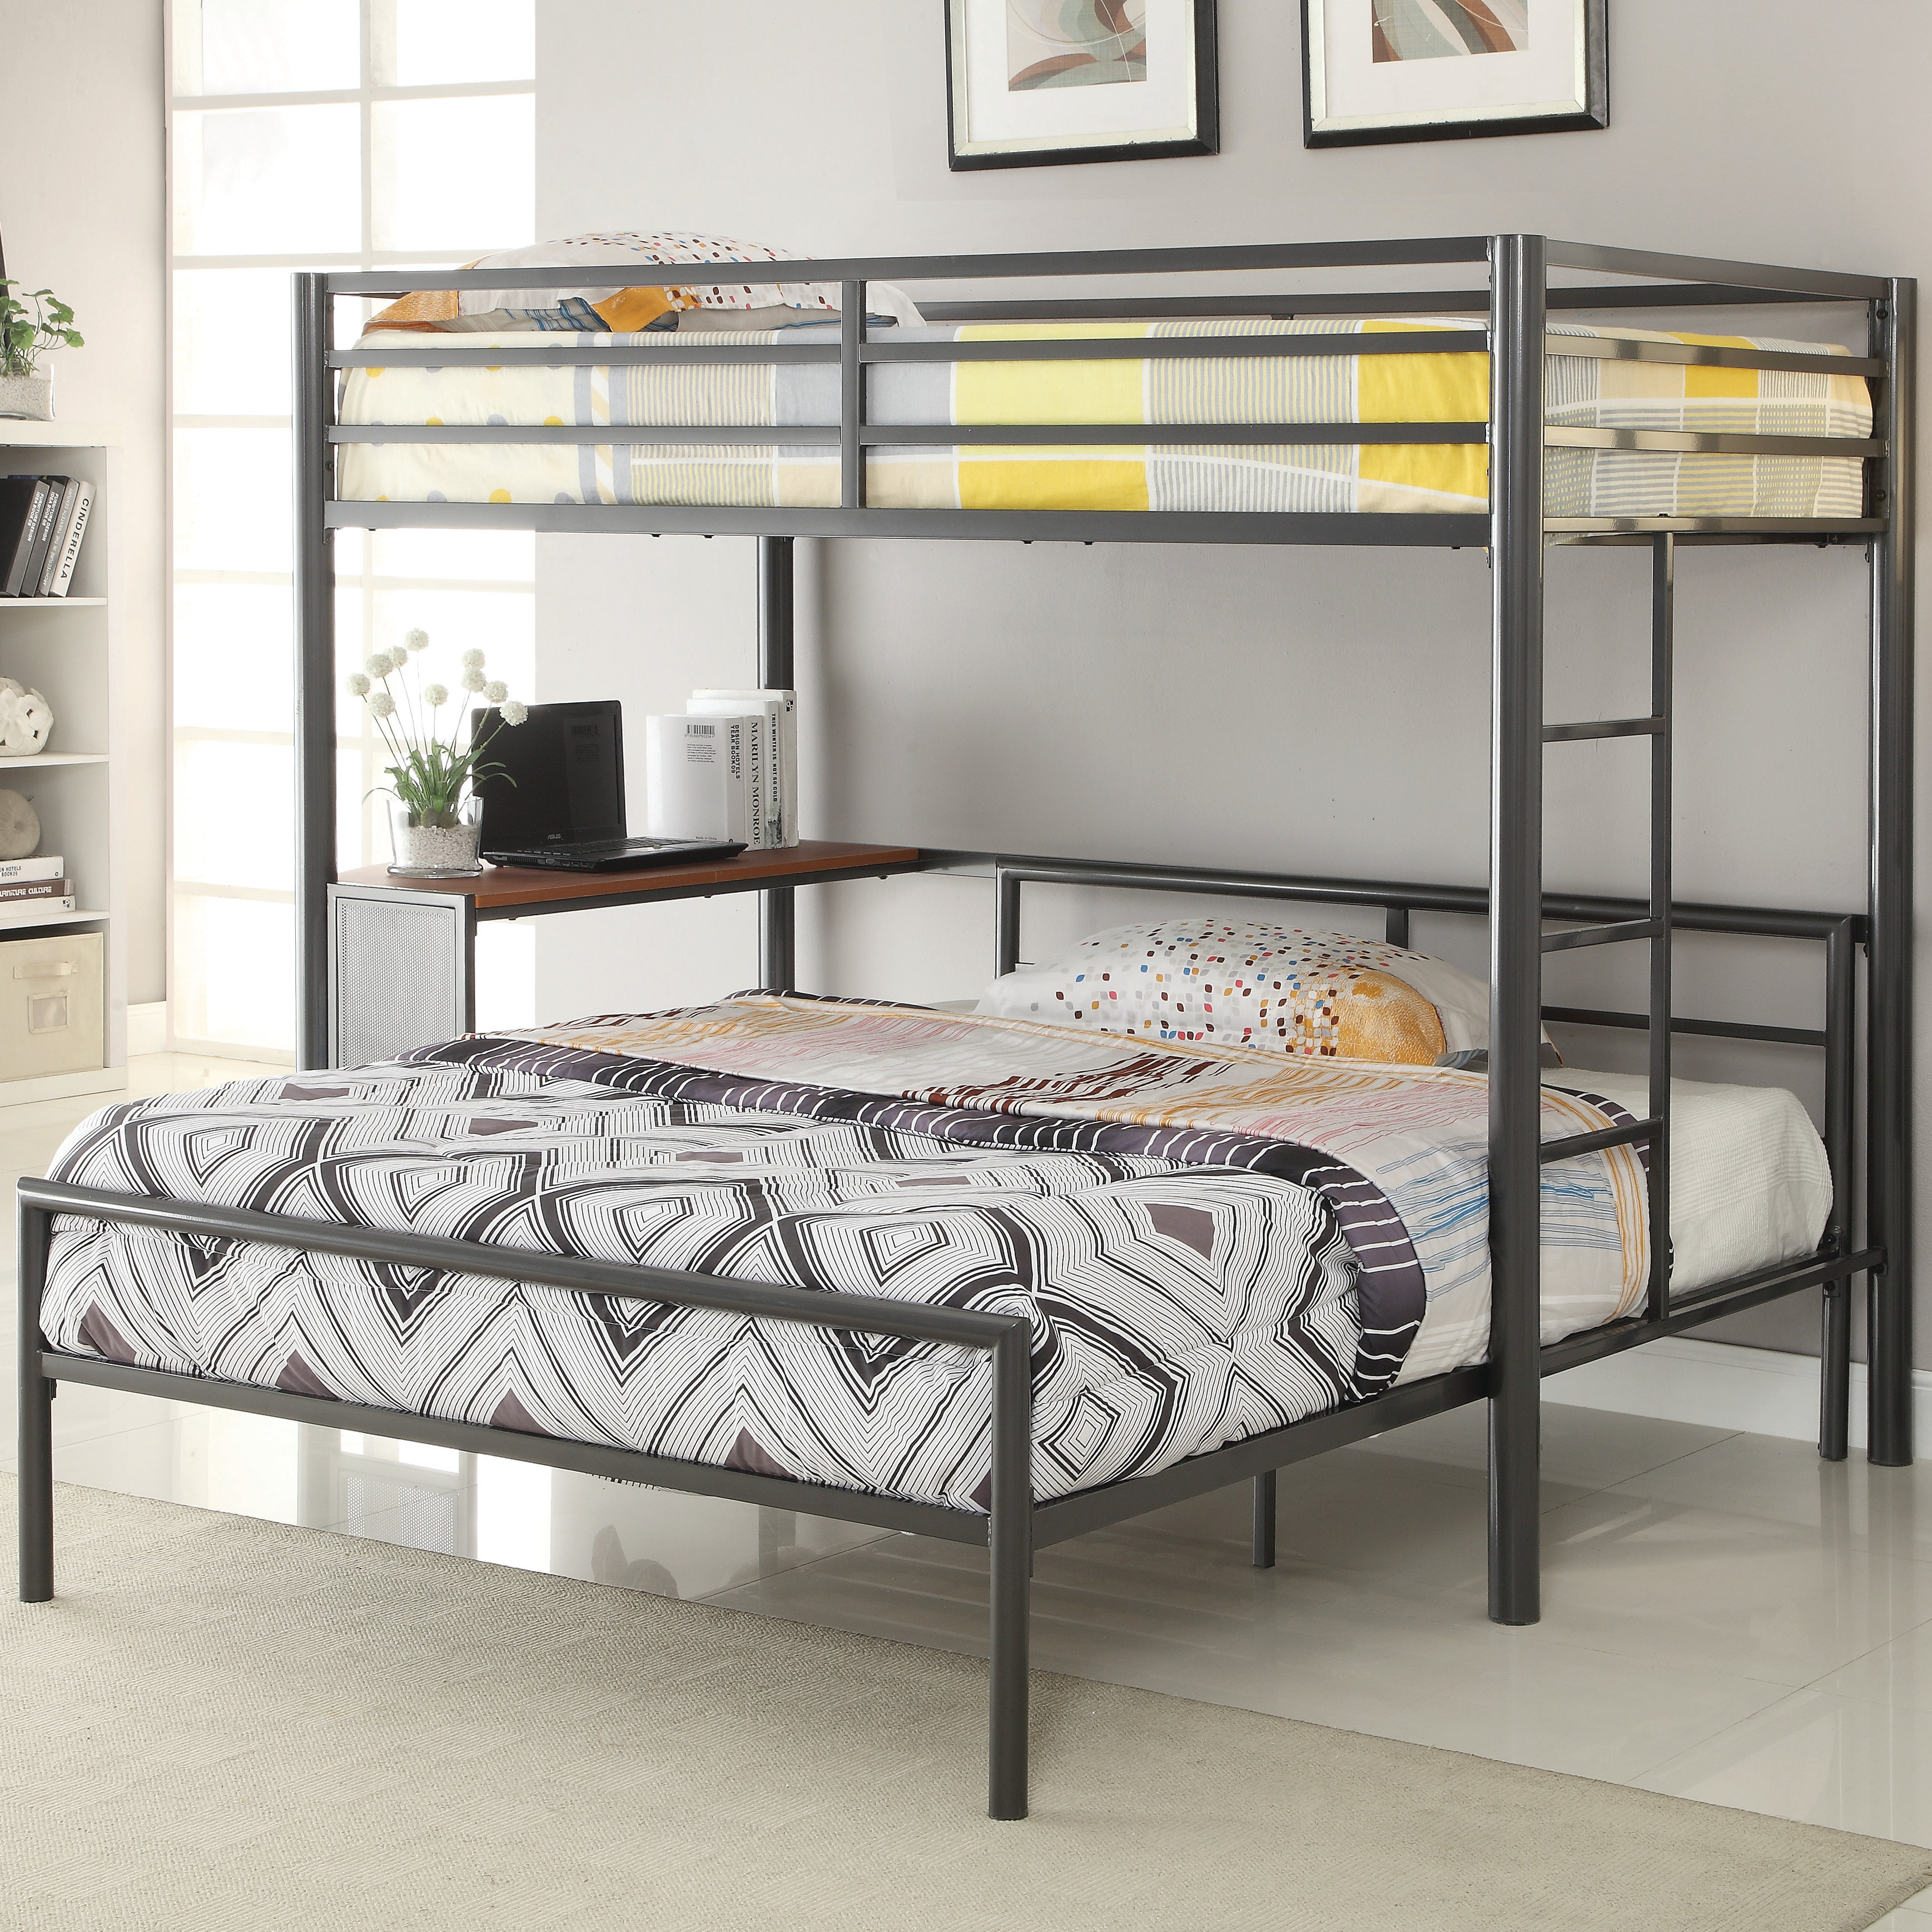 twin full bunk bed